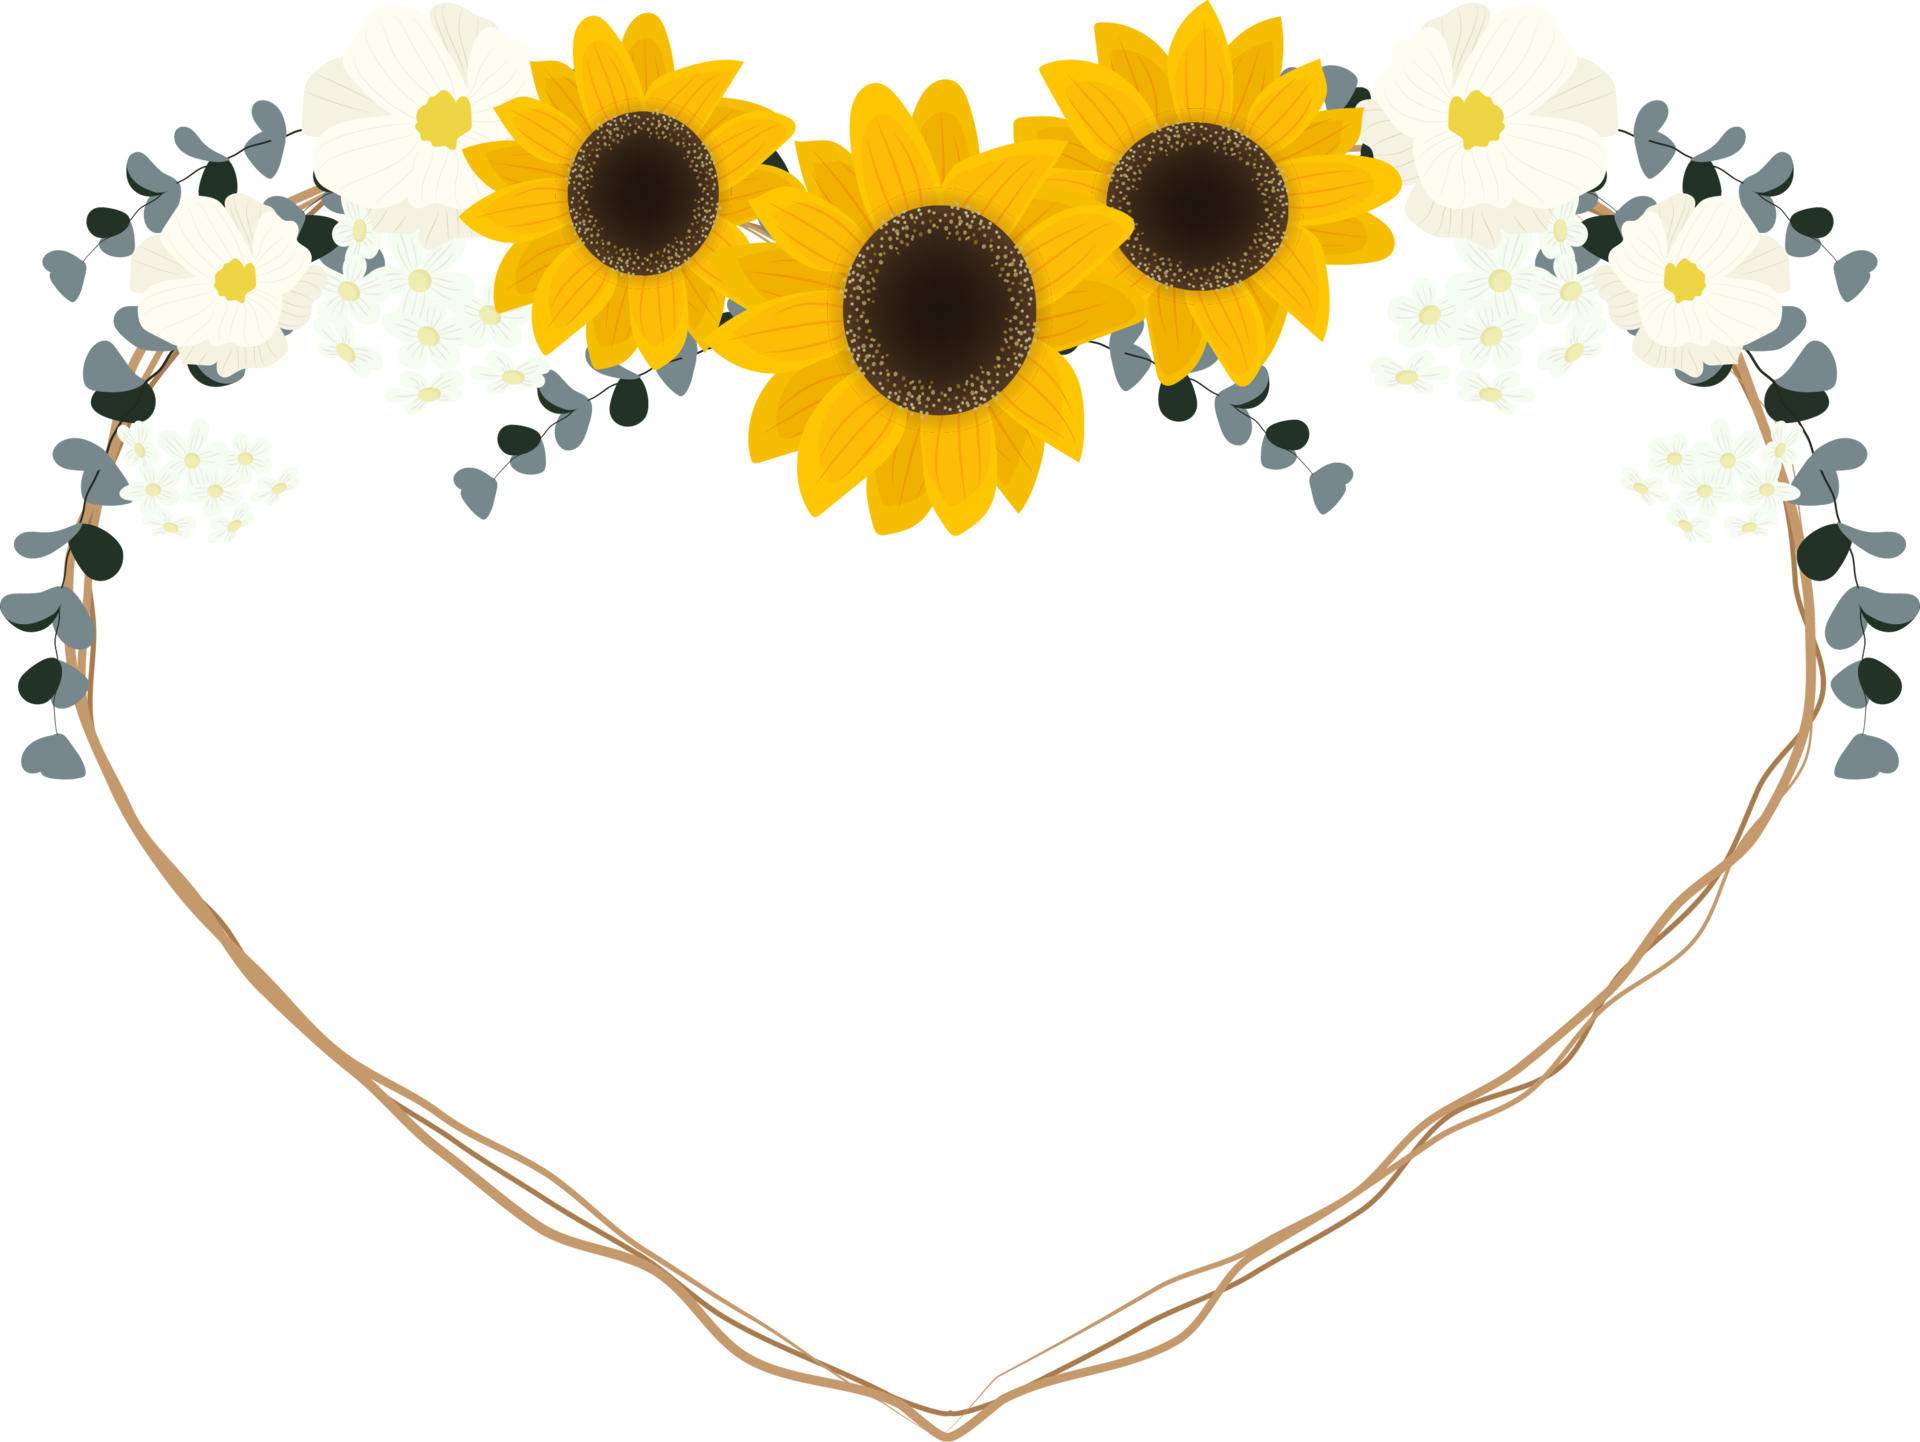 Yellow Sunflower Wild Flower And Eucalyptus Leaf On Dry Twig Bouquet Heart  Wreath Frame Collection Flat Style Stock Illustration - Download Image Now  - iStock